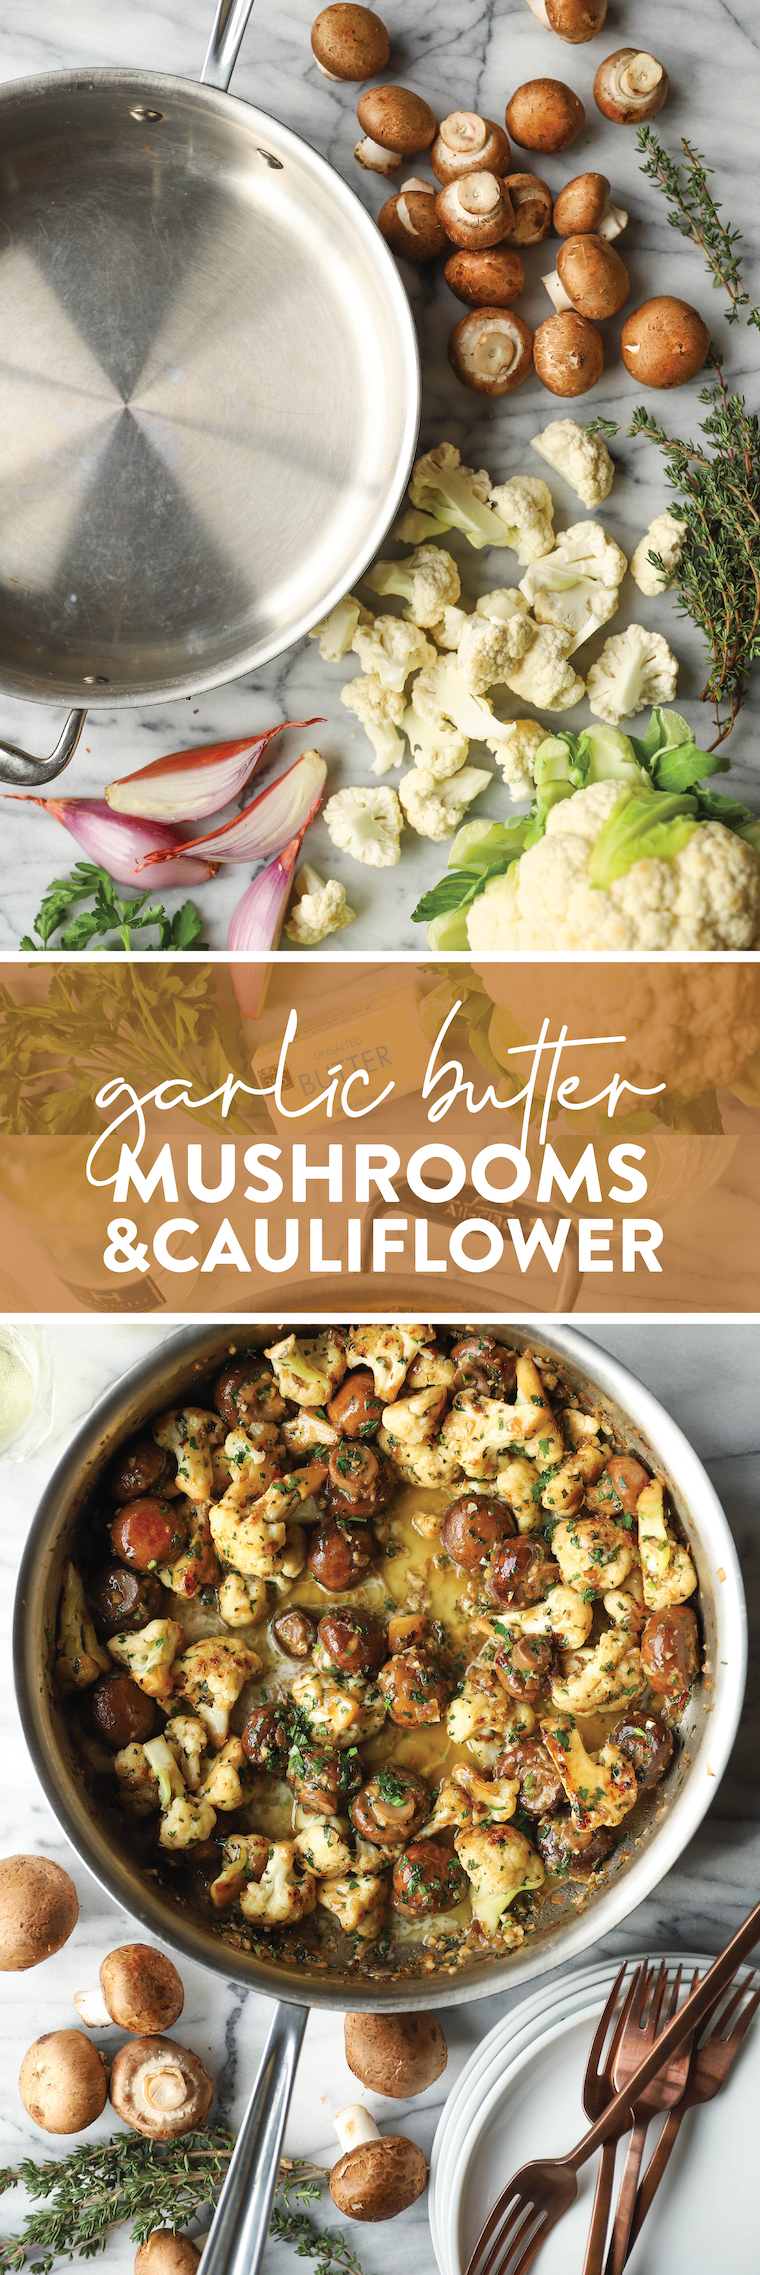 Garlic Butter Mushrooms and Cauliflower - The perfect side dish! Chockfull of veggies, easy to make + loaded with garlicky-buttery goodness!